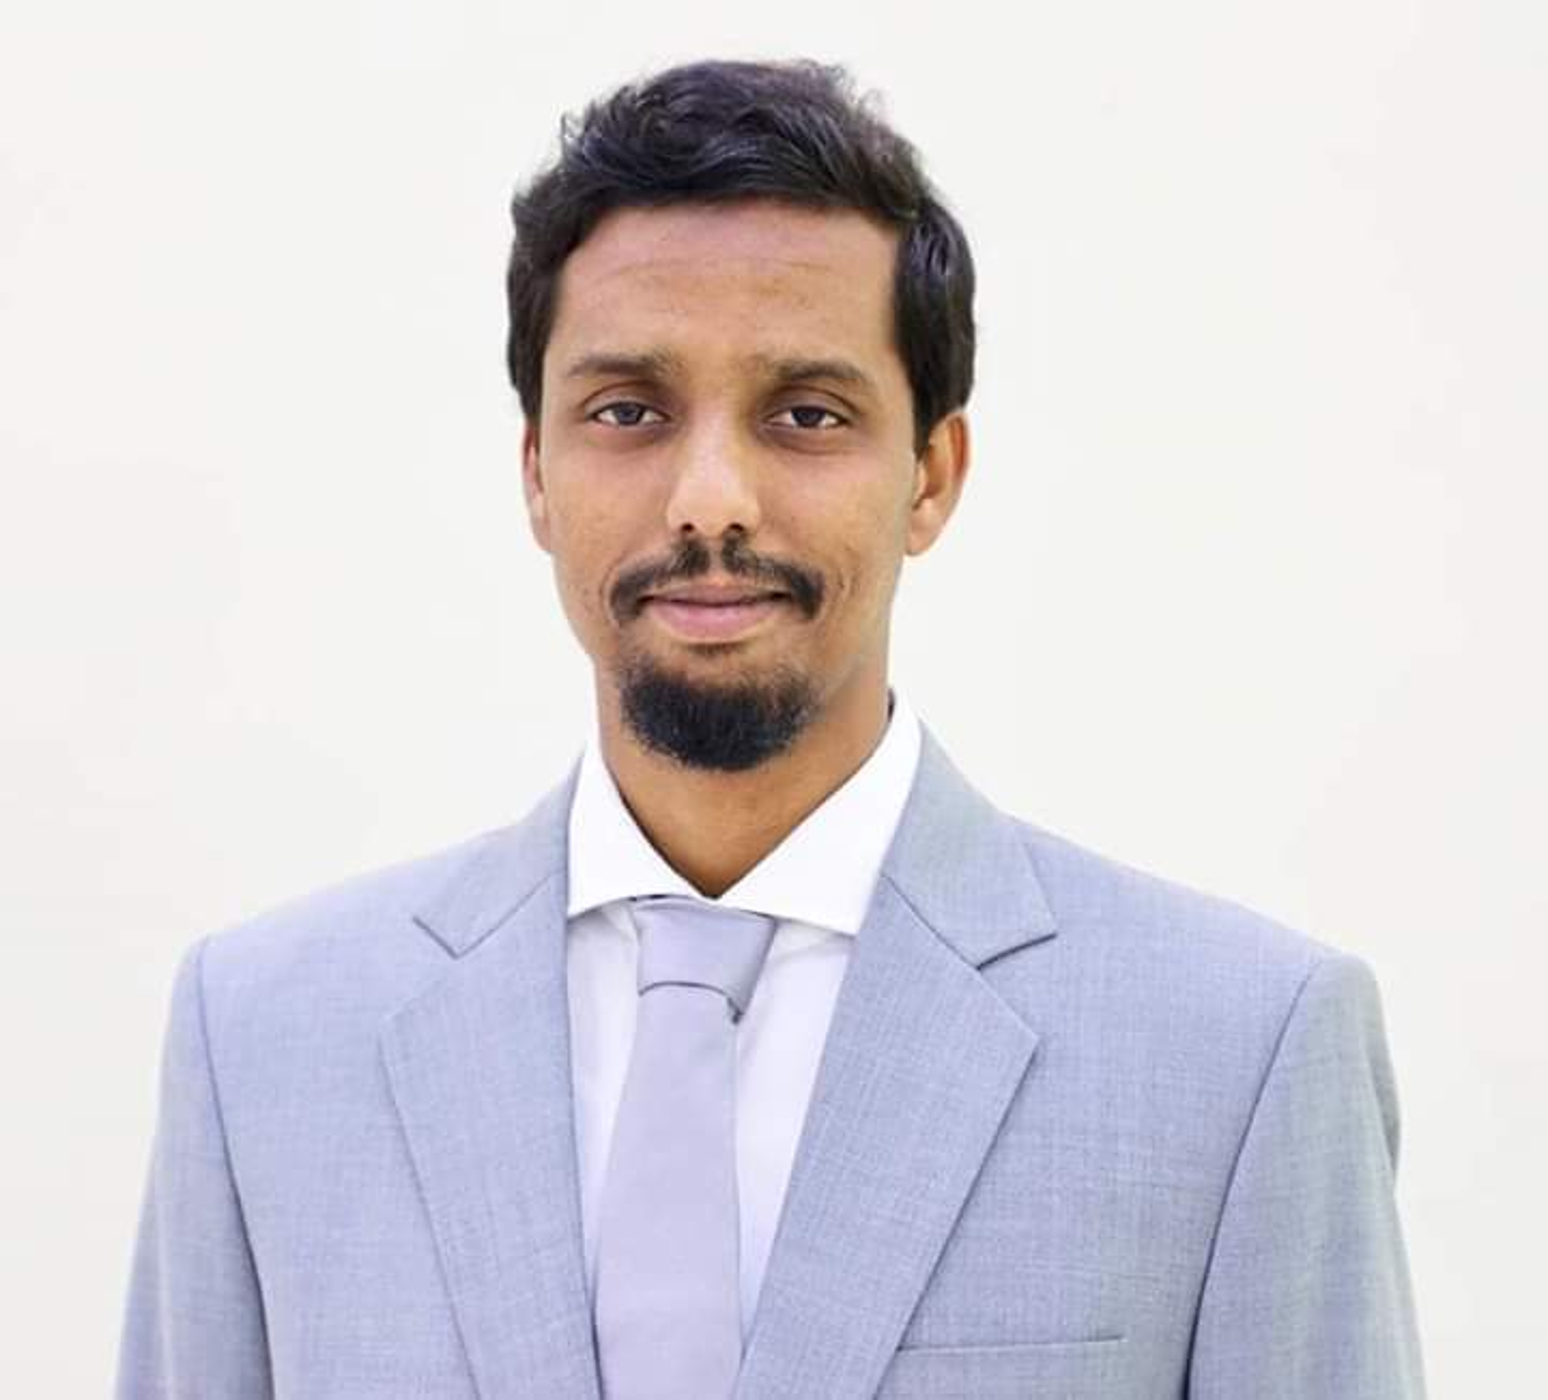 Somali politician Asad Osman Abdullahi (Majerteen Darod clan), representing a "pure" Cushitic physiognomy. The ancient Cushitic settlers of the Great Lakes region were described as "tall, bearded, long-haired, and 'red' in colour," and thus would likely have had a similar phenotype. However, their great height surpassed that of most other Afro-Asiatic-speaking populations, except for the Tuareg Berbers.